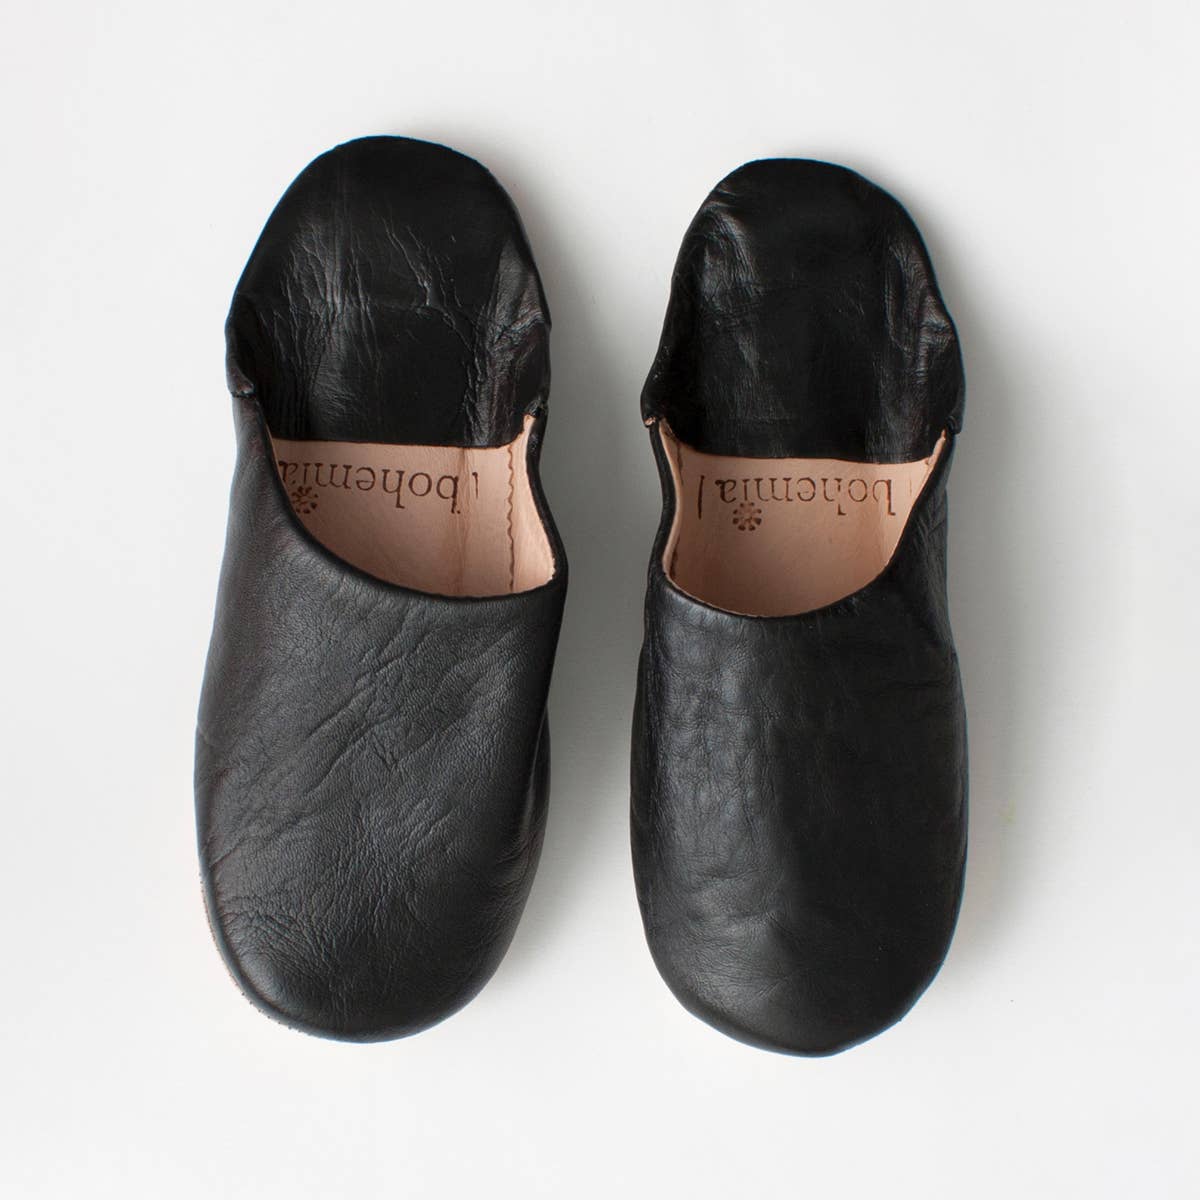 Moroccan Babouche Slippers, Black